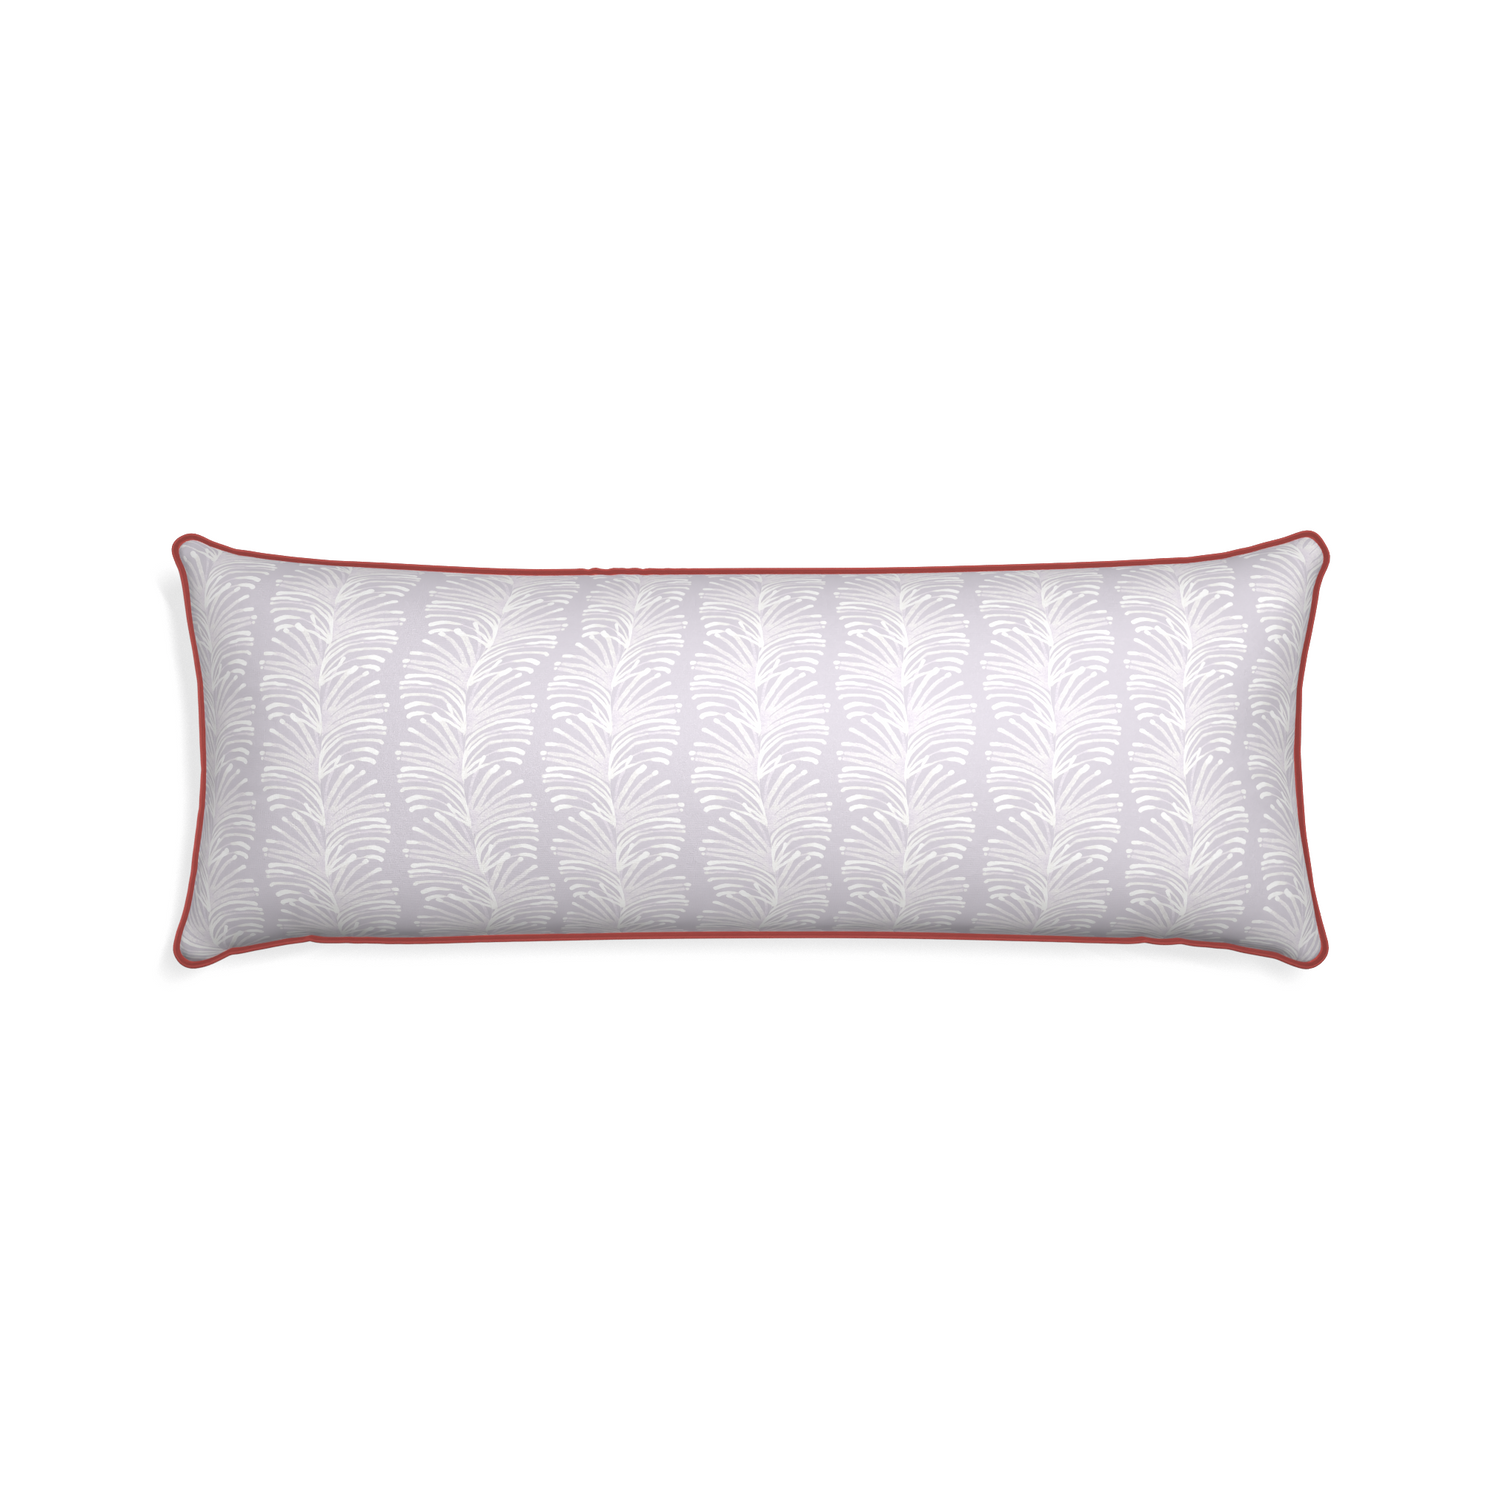 Xl-lumbar emma lavender custom lavender botanical stripepillow with c piping on white background